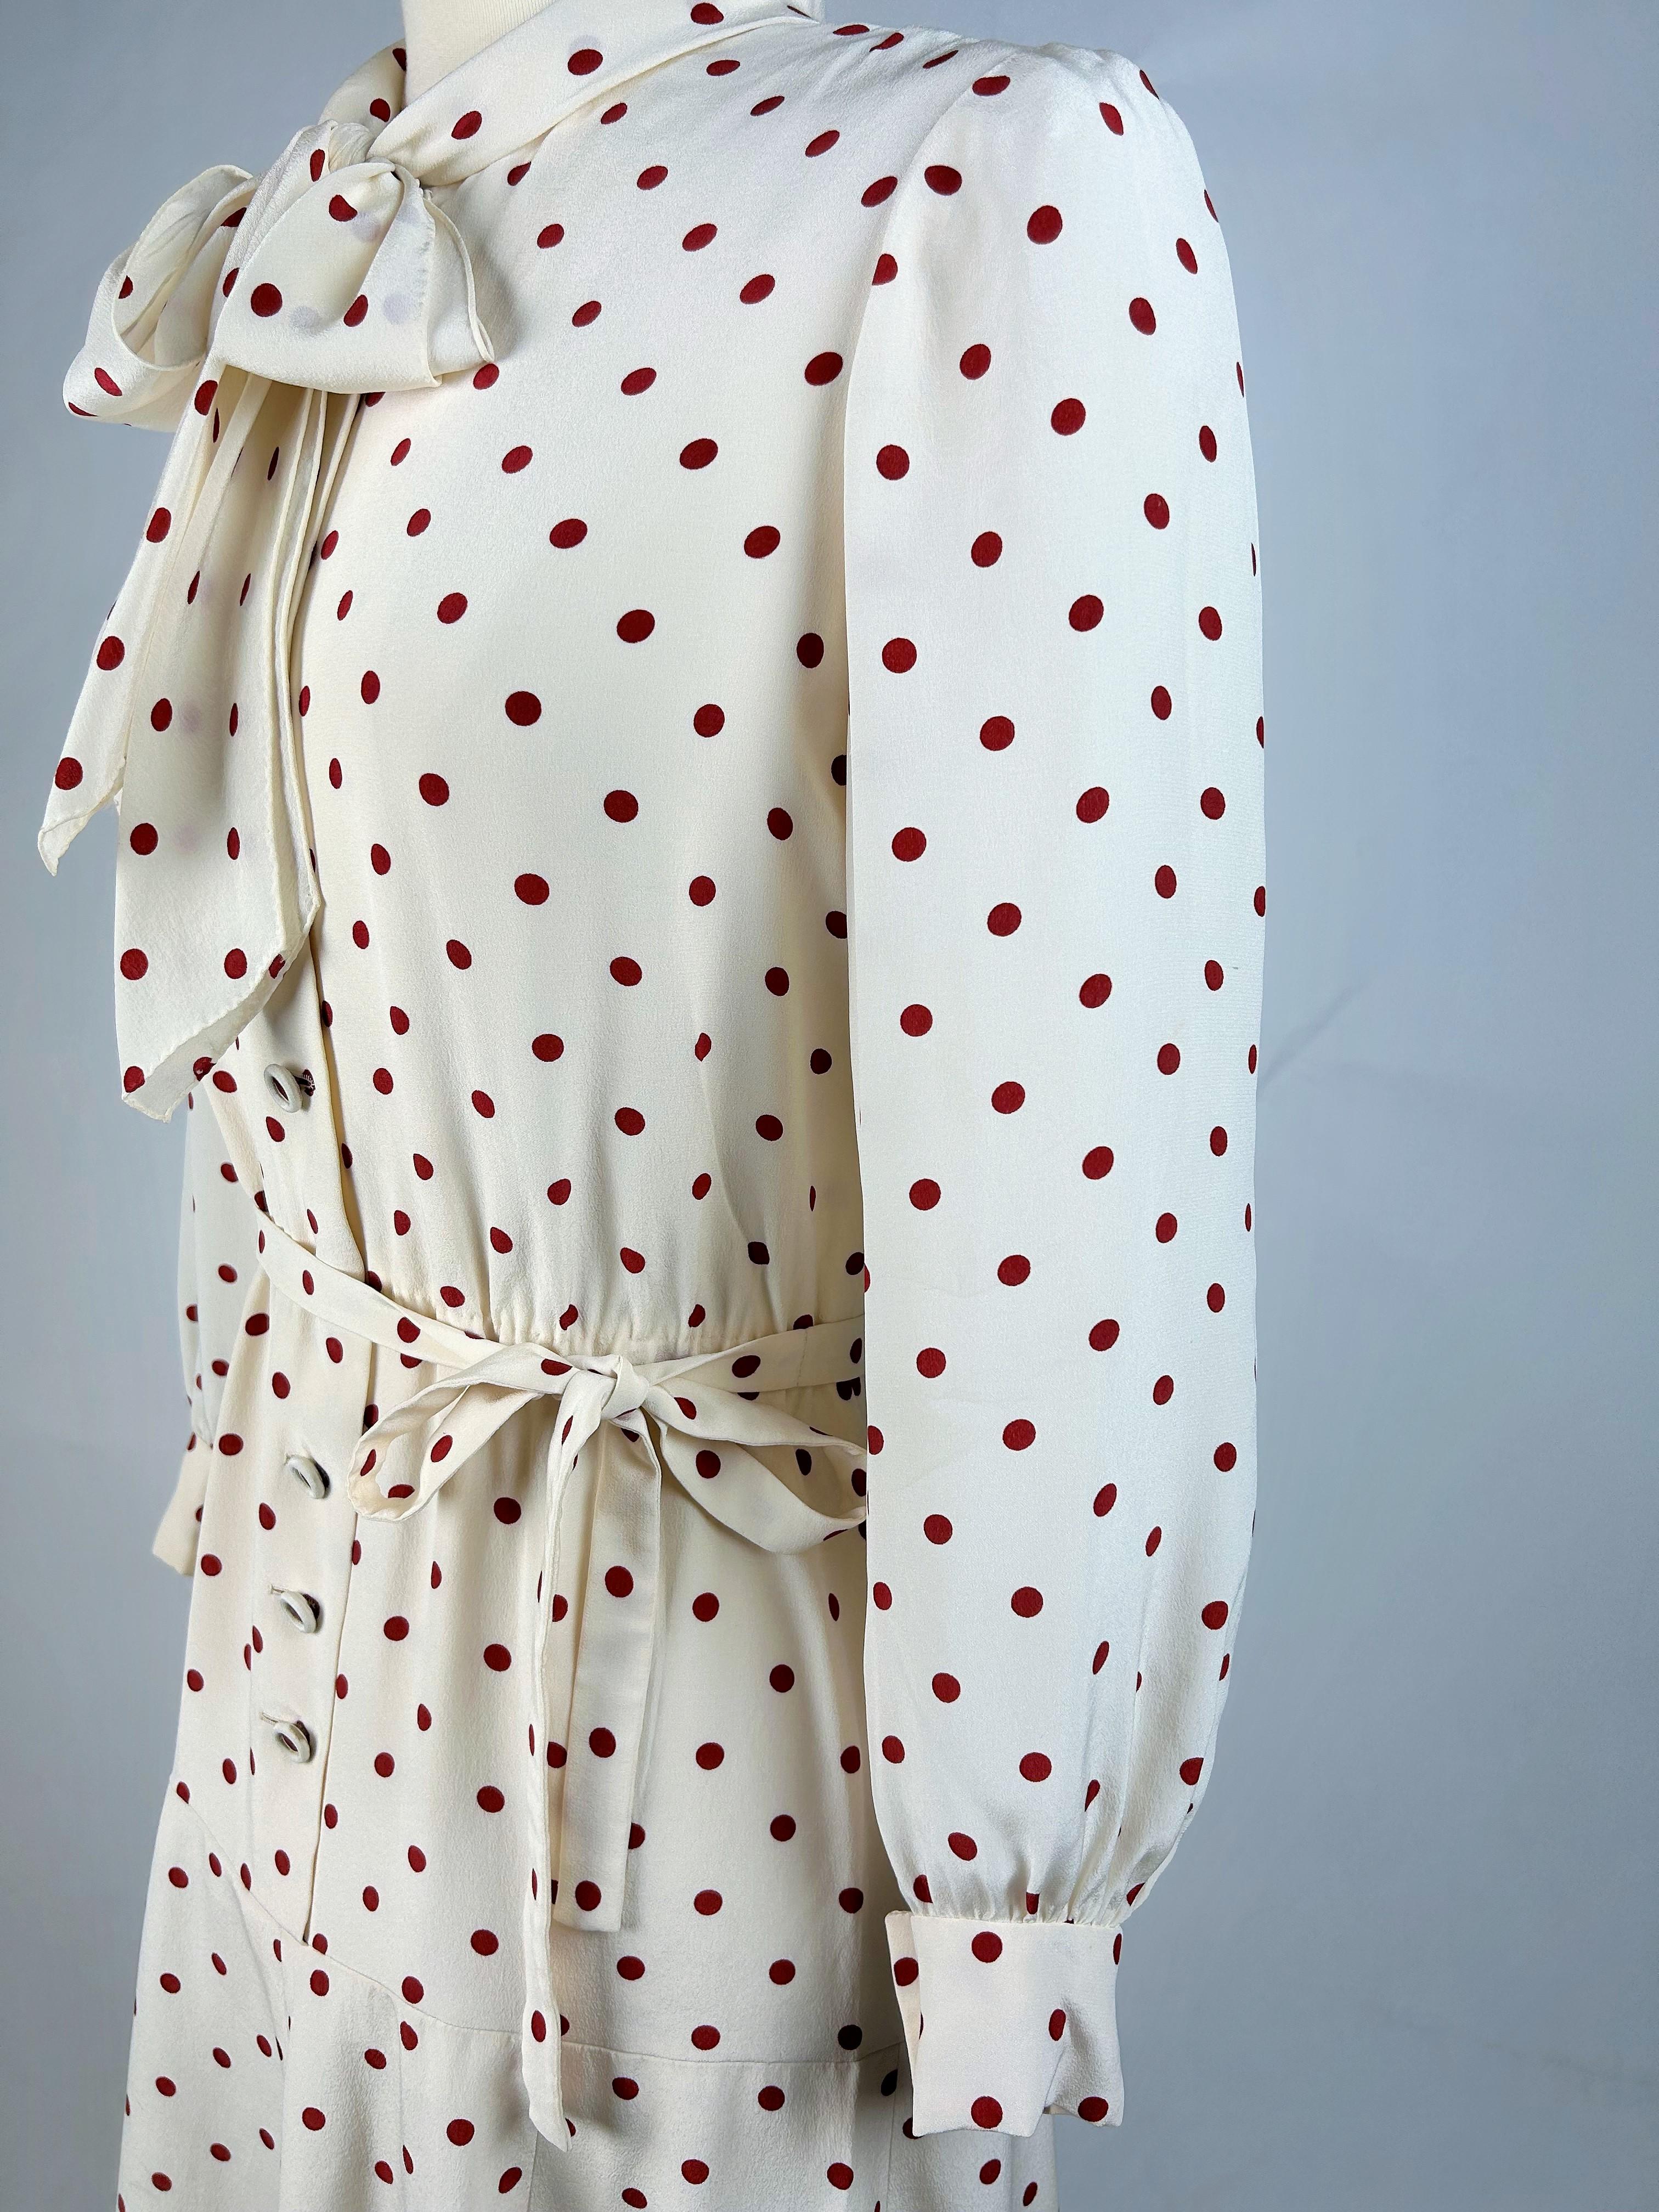 A Polka Dots crepe cocktail dress by Chanel Haute Couture numbered 59644 C. 1975 For Sale 10